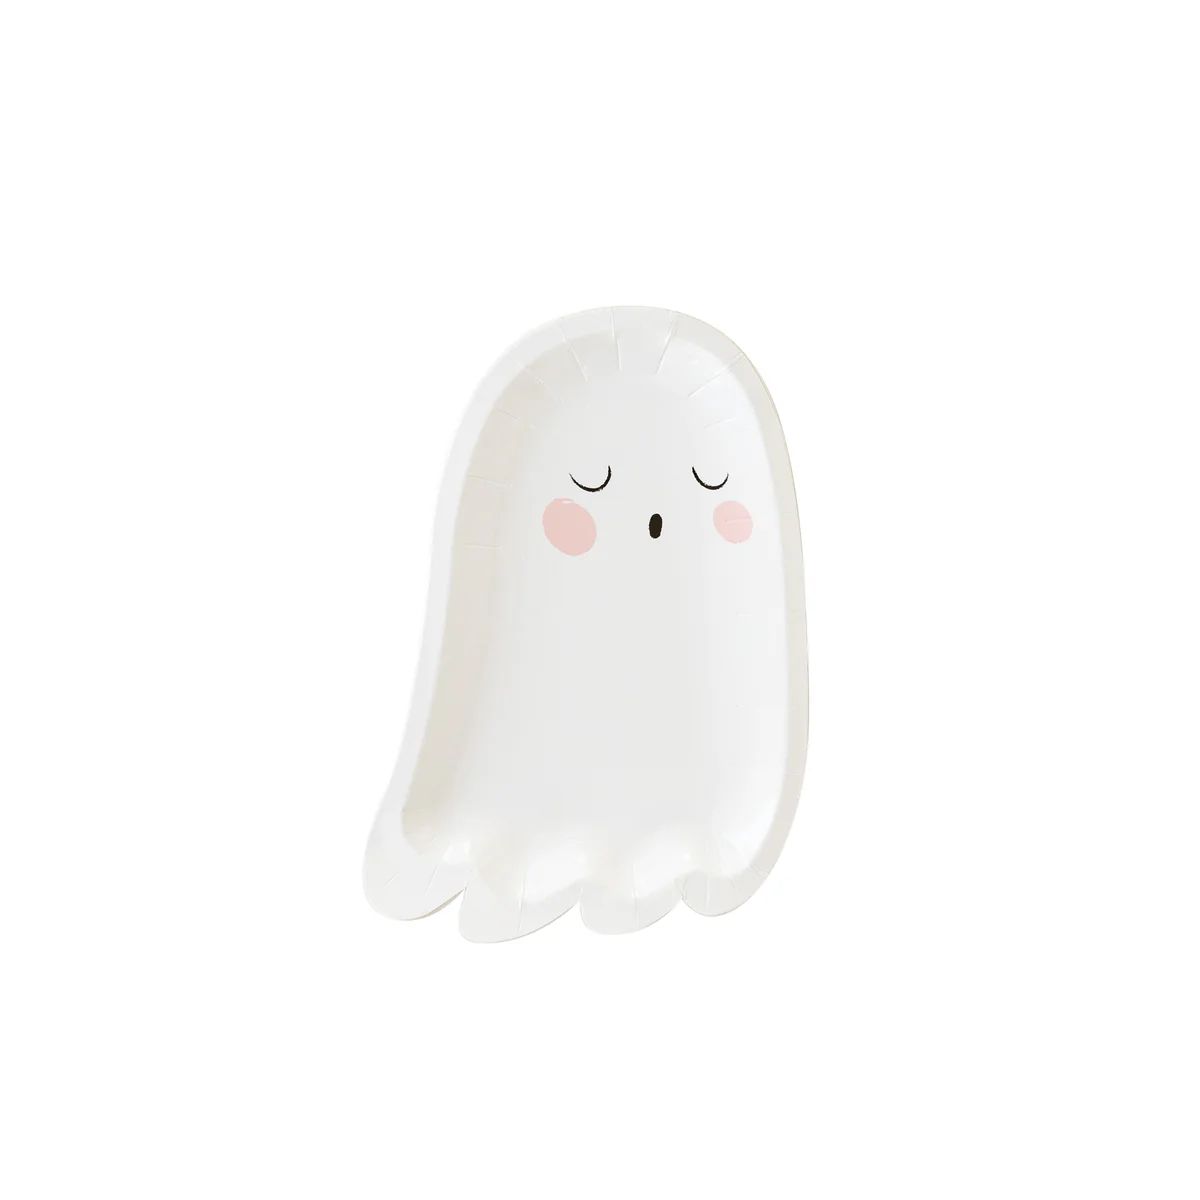 Trick or Treat Ghost Shaped Plate | My Mind's Eye